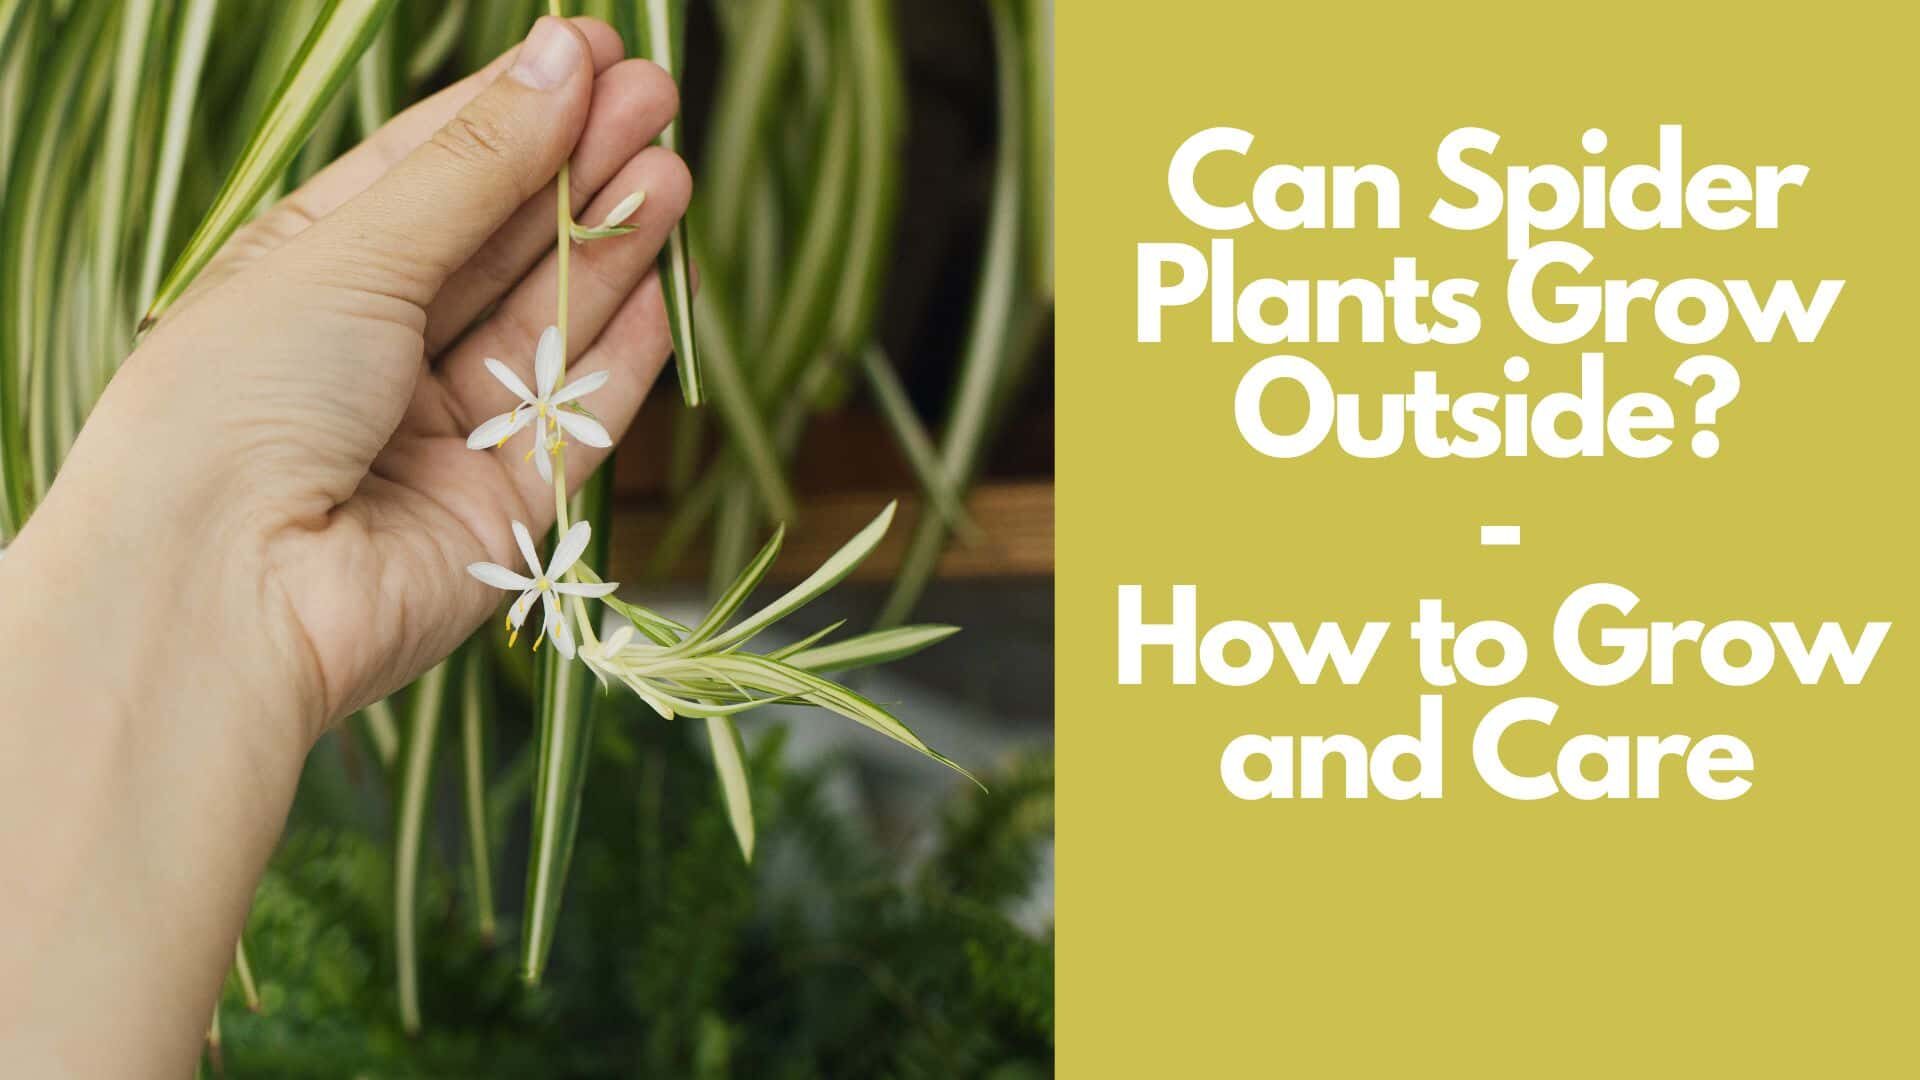 Can Spider Plants Grow Outside? : How to Grow and Care 